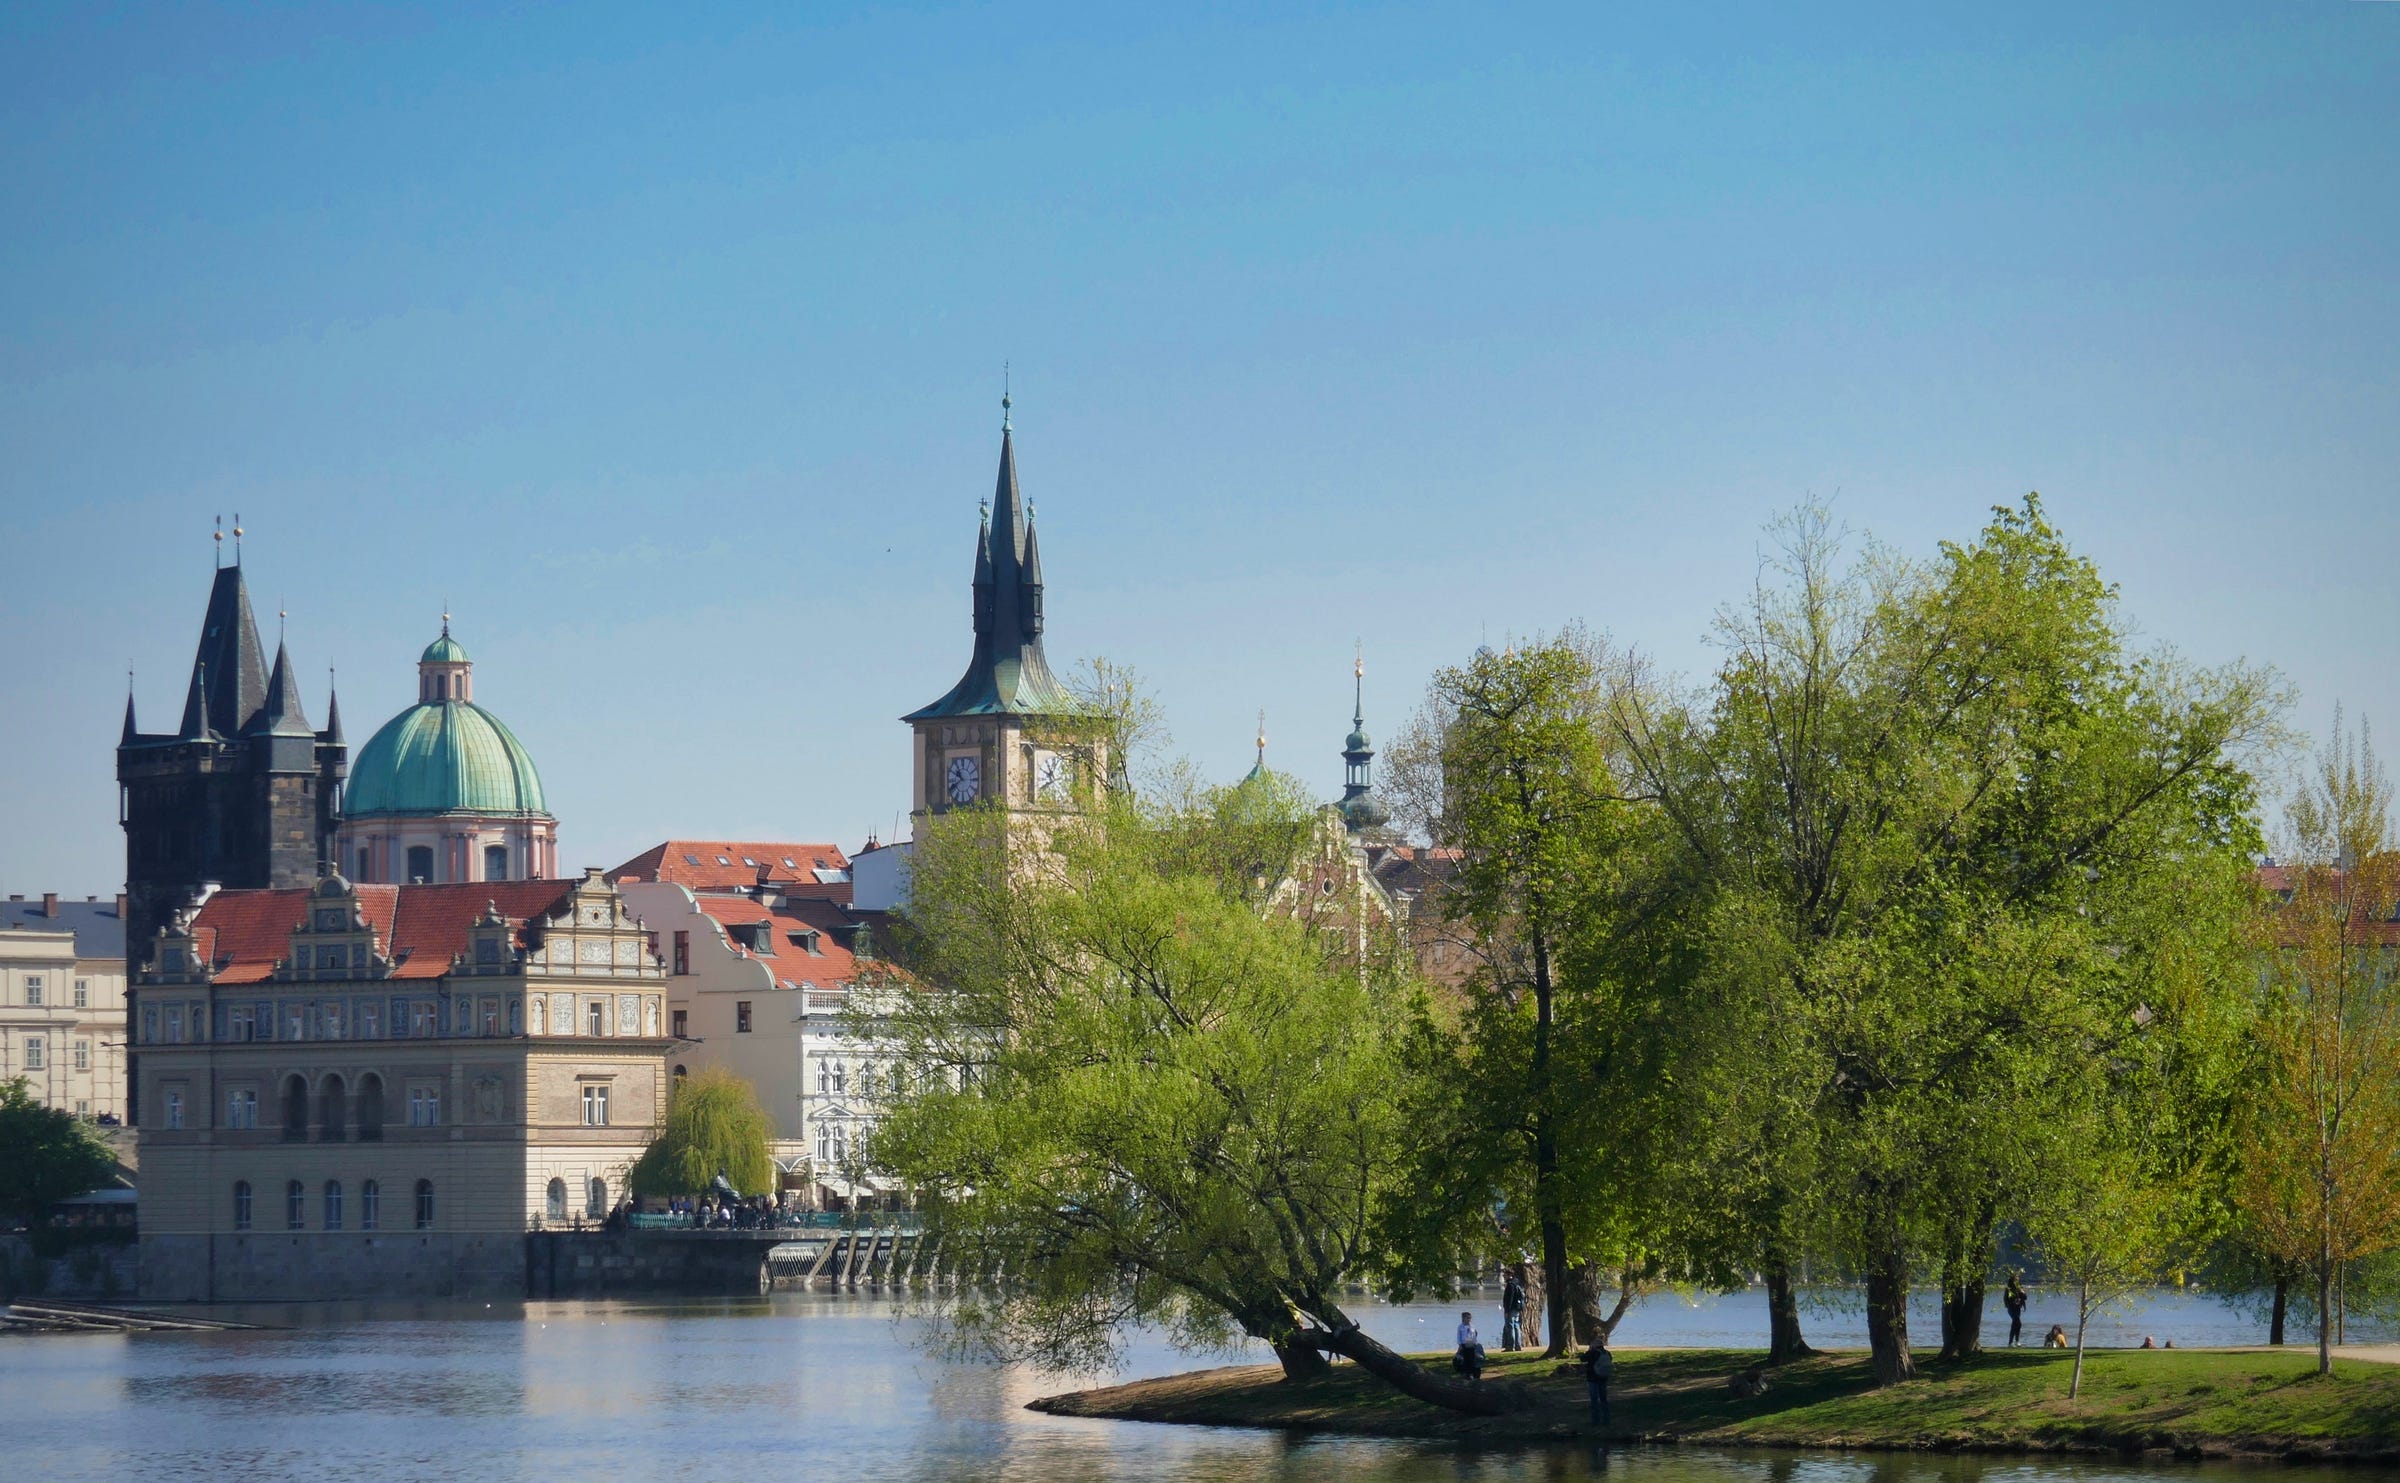 A view of a small island with trees and a park bench close to the shore of the Vltava River in Prague. In the background are buildings including a clock tower.